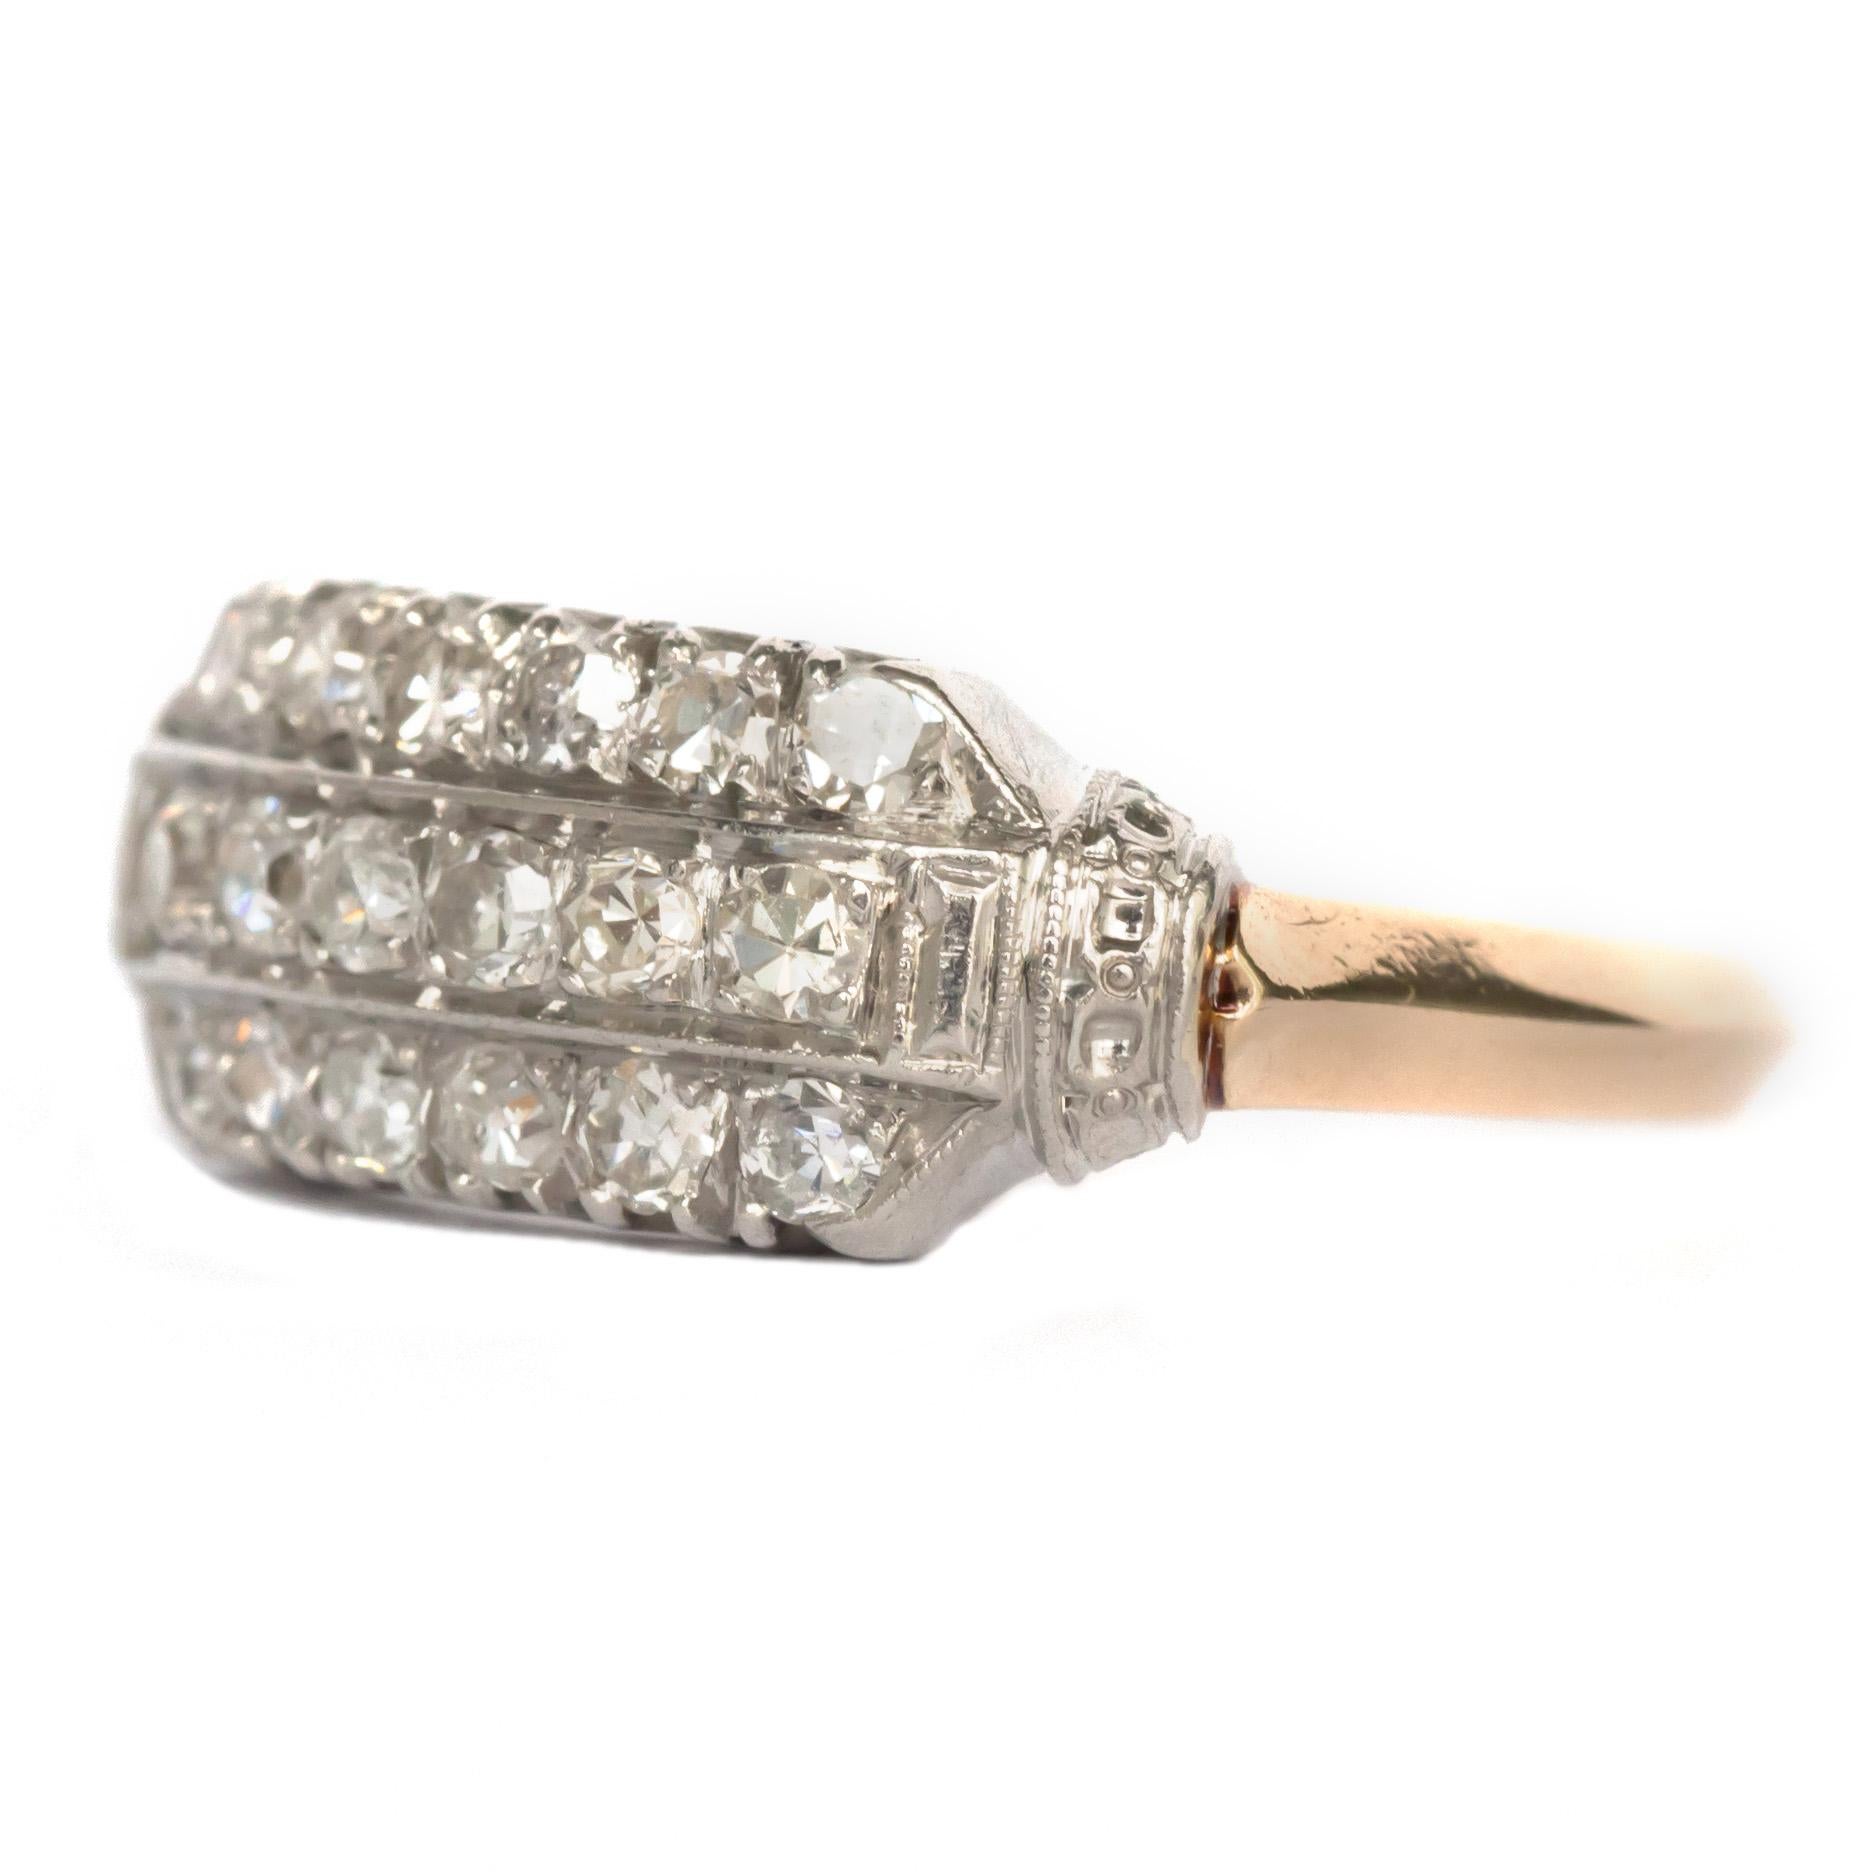 Ring Size: 6.5 
Metal Type: 14 karat Yellow Gold & Platinum 
Weight: 3.6 grams

Center Diamond Details
Shape: Antique Single Cut 
Carat Weight: .20 carat total weight
Color: F
Clarity: VS1

Finger to Top of Stone Measurement: 2.45mm 
Width: 7.35mm
